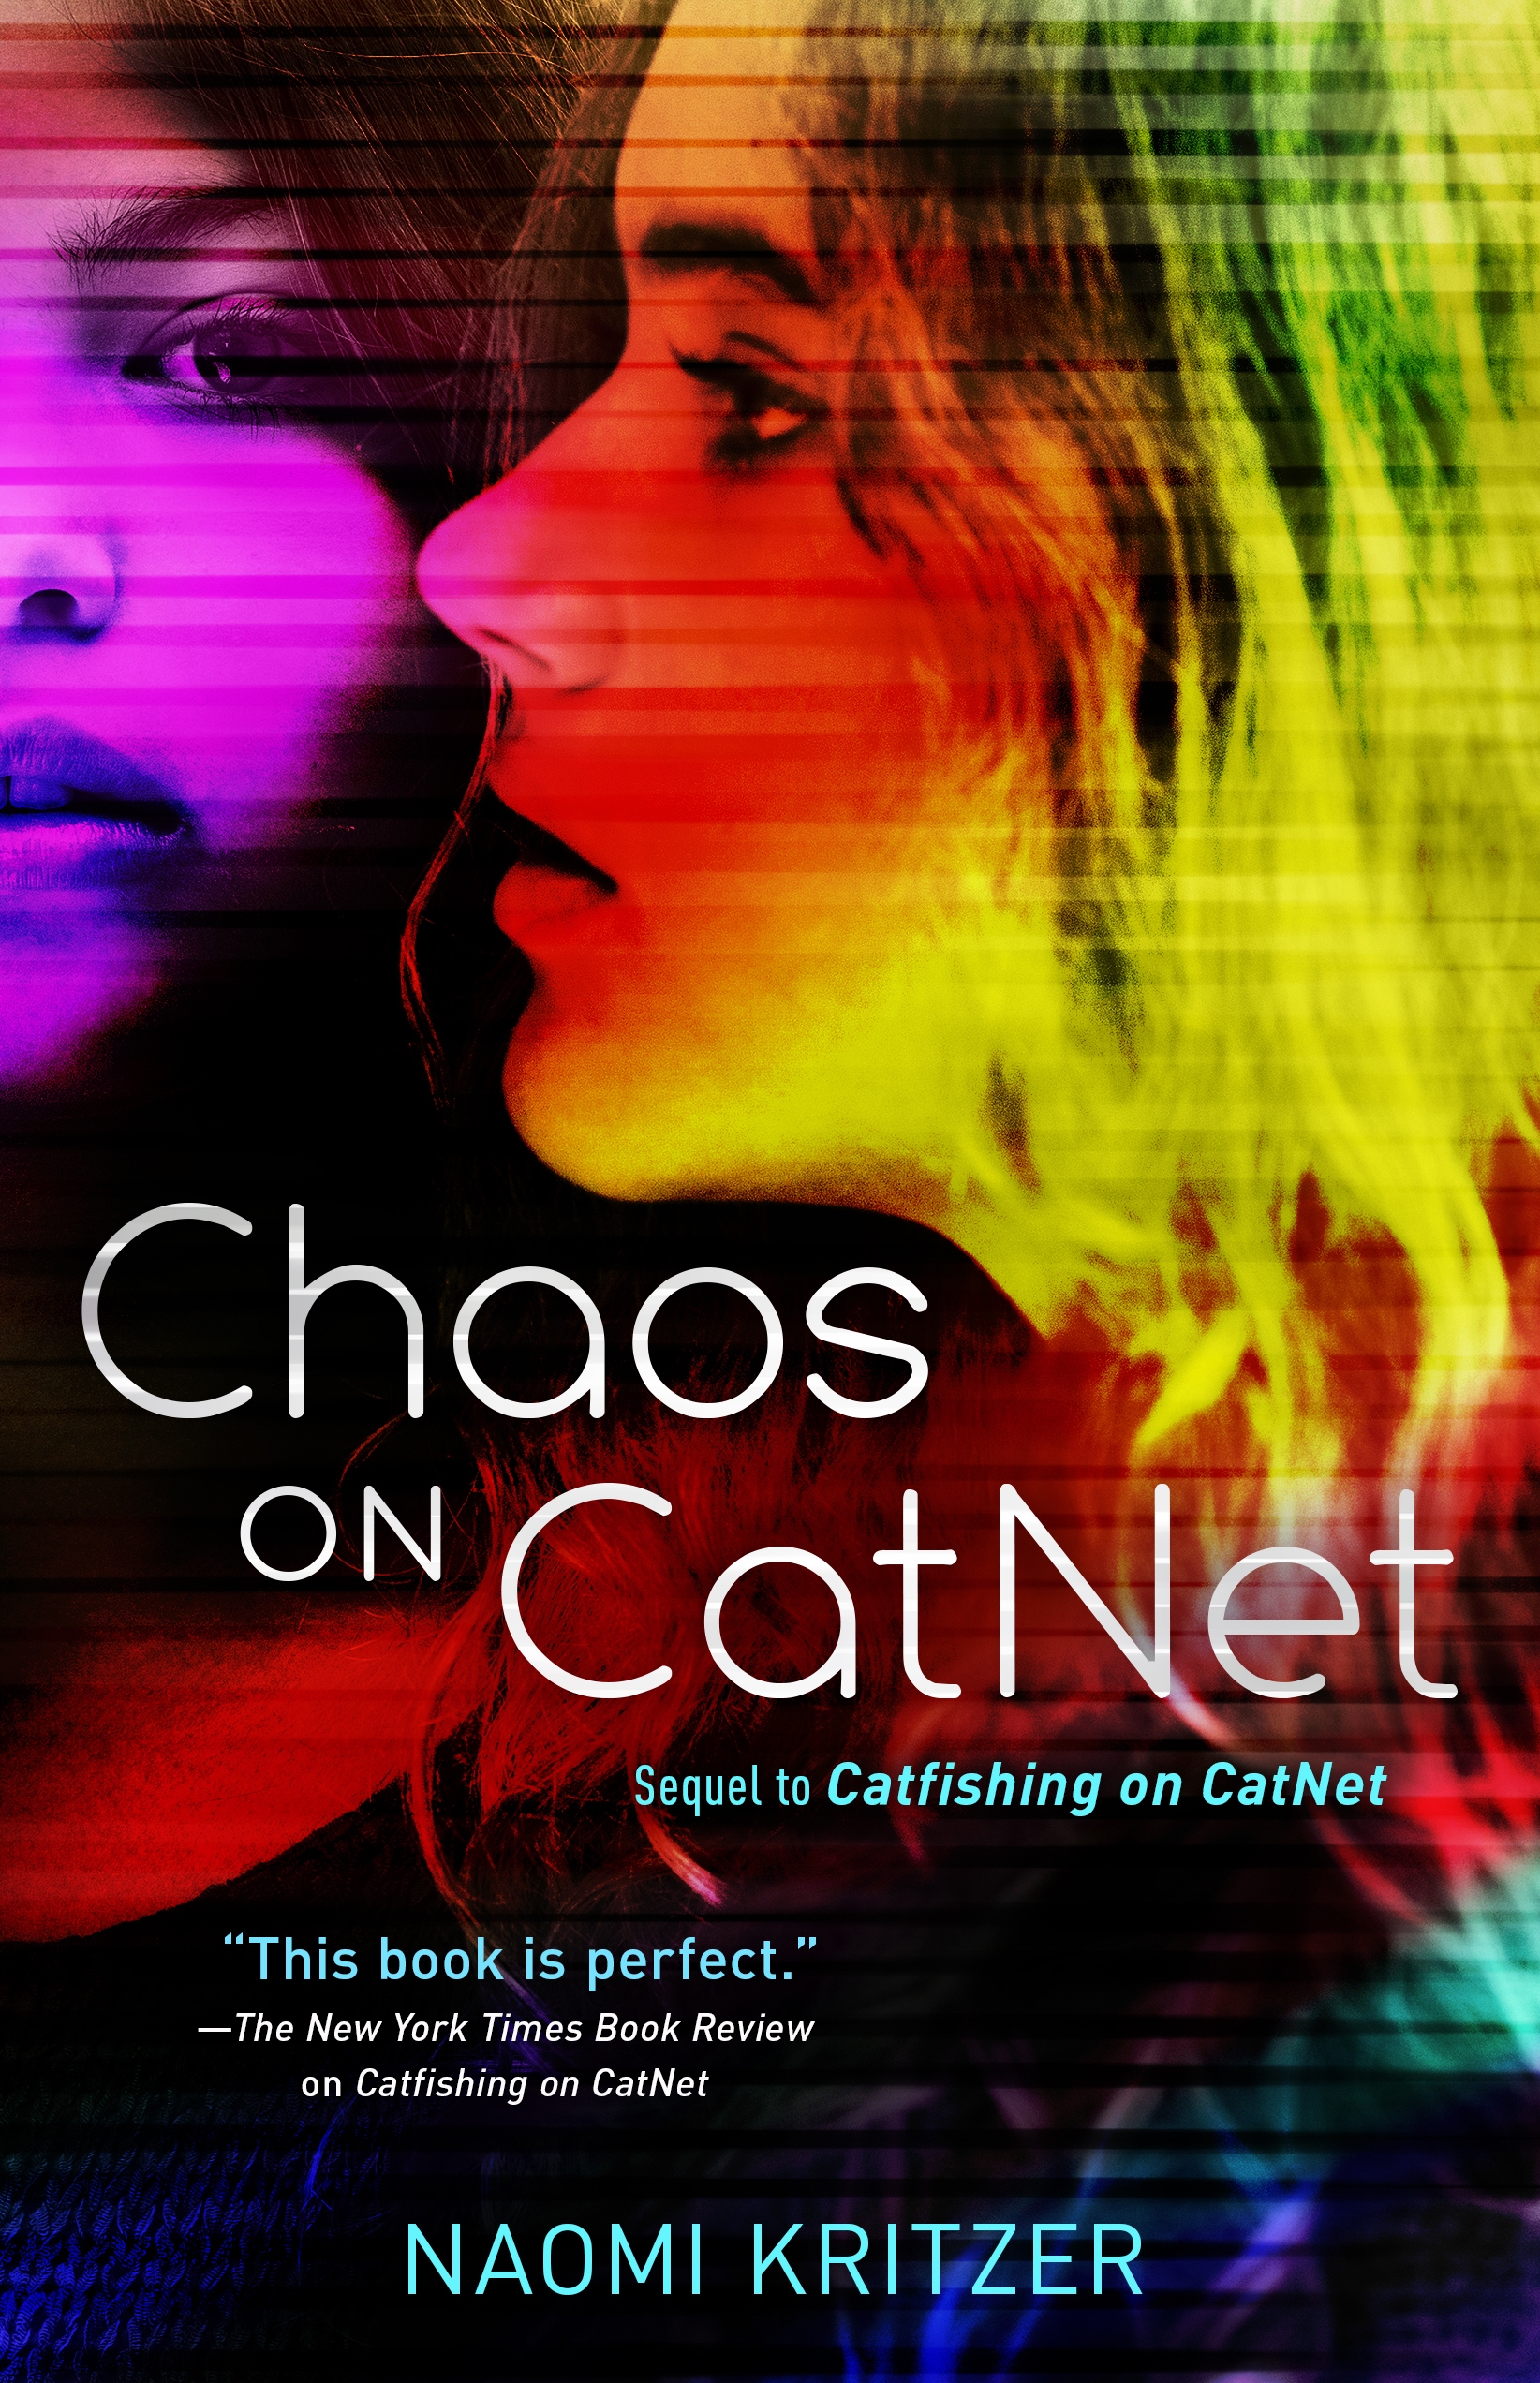 Chaos on CatNet : Sequel to Catfishing on CatNet by Naomi Kritzer